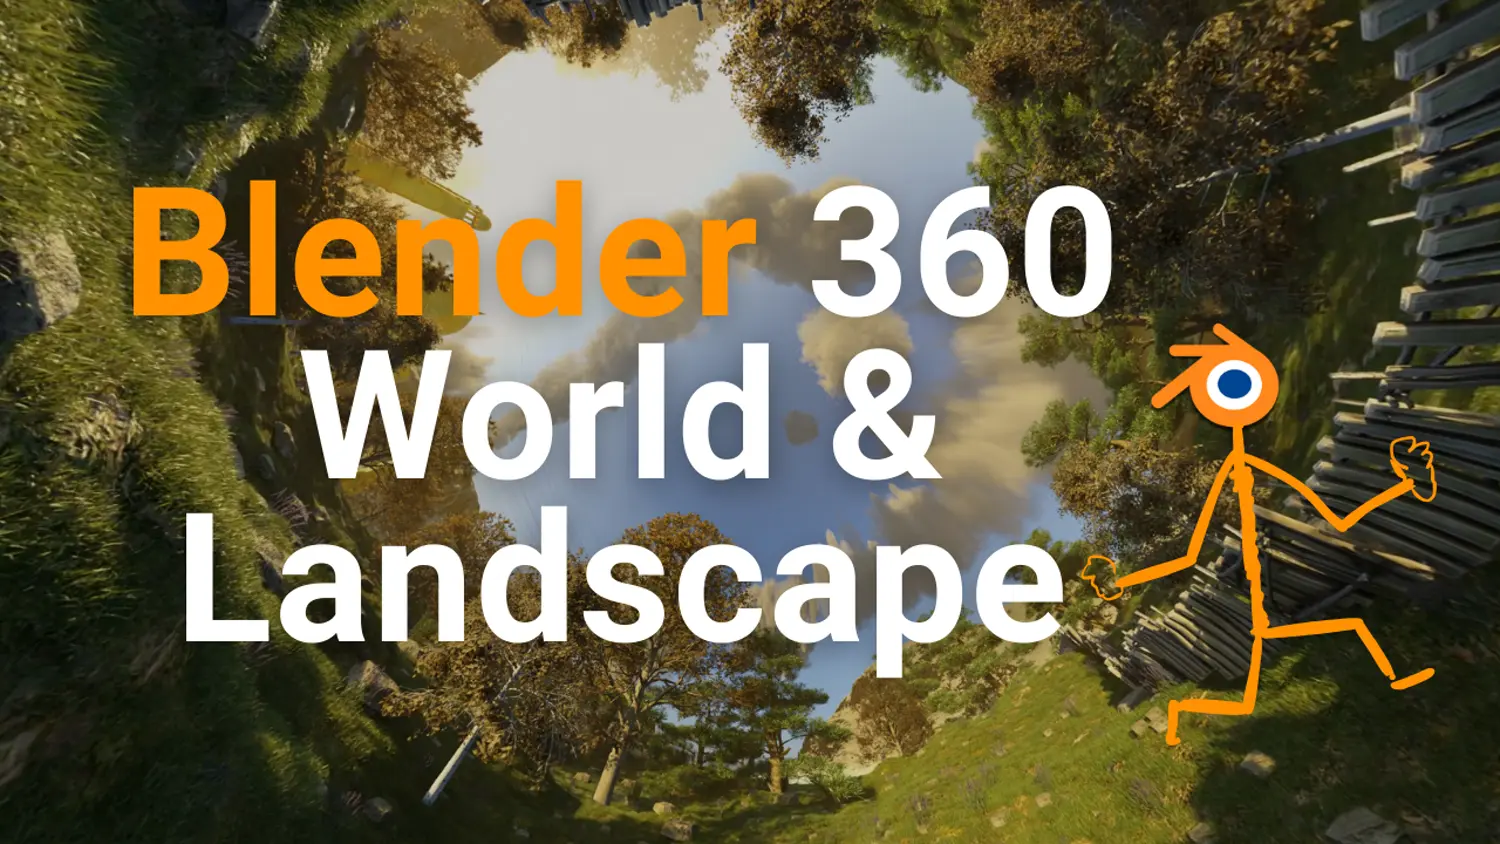 Creating immersive 360-degree worlds and landscapes in Blender